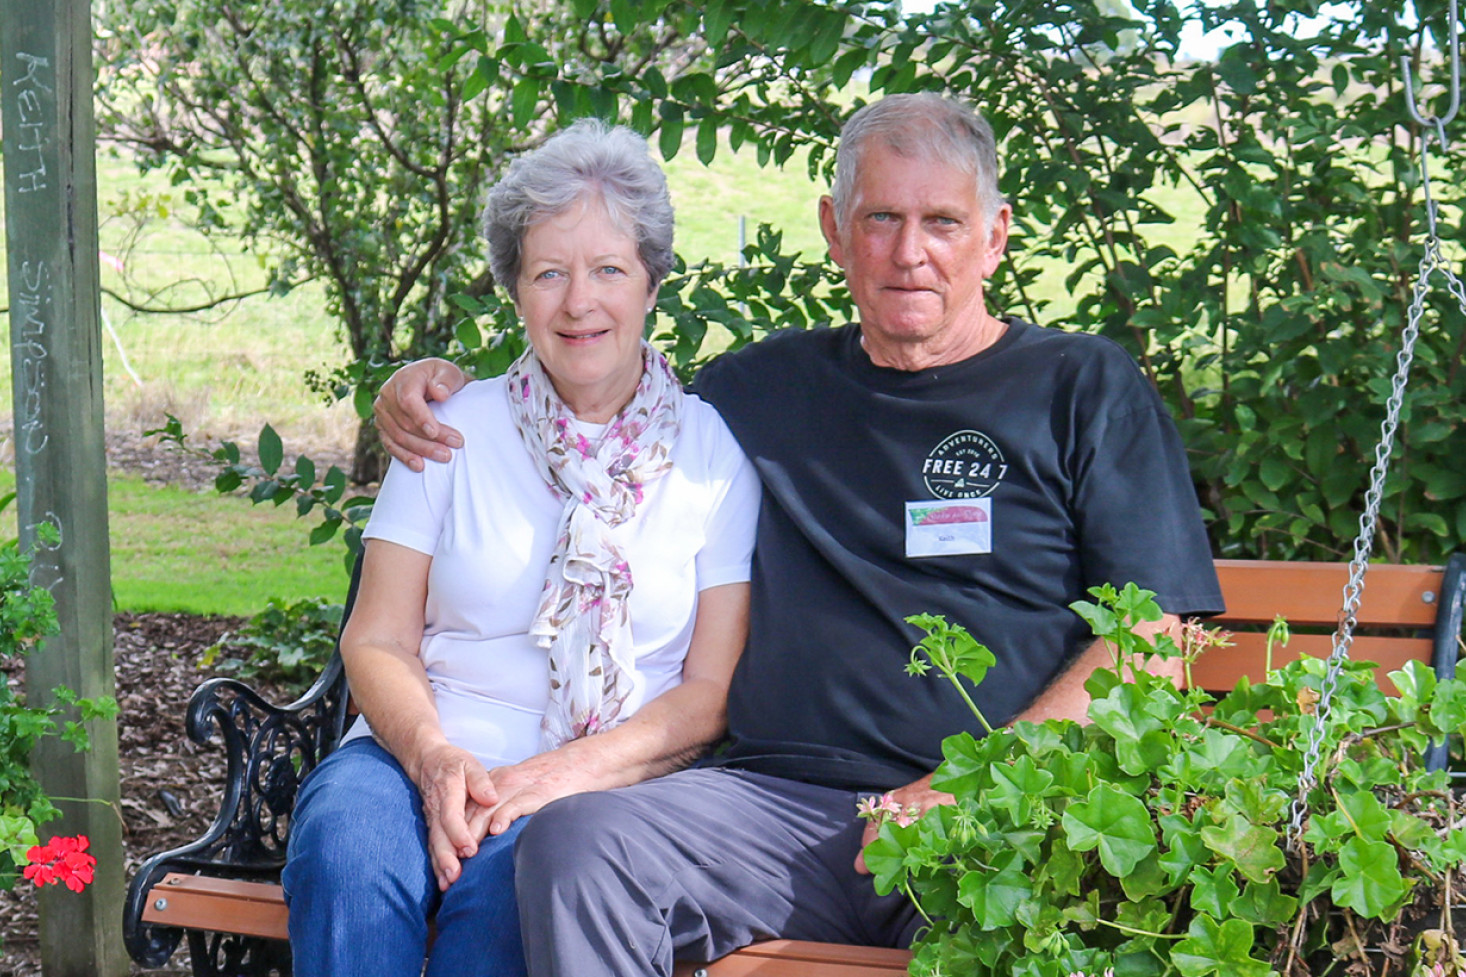 Gayle and Keith Simpson opened up their garden to the public over the weekend. They have transformed just under an acre of land into a peaceful oasis.